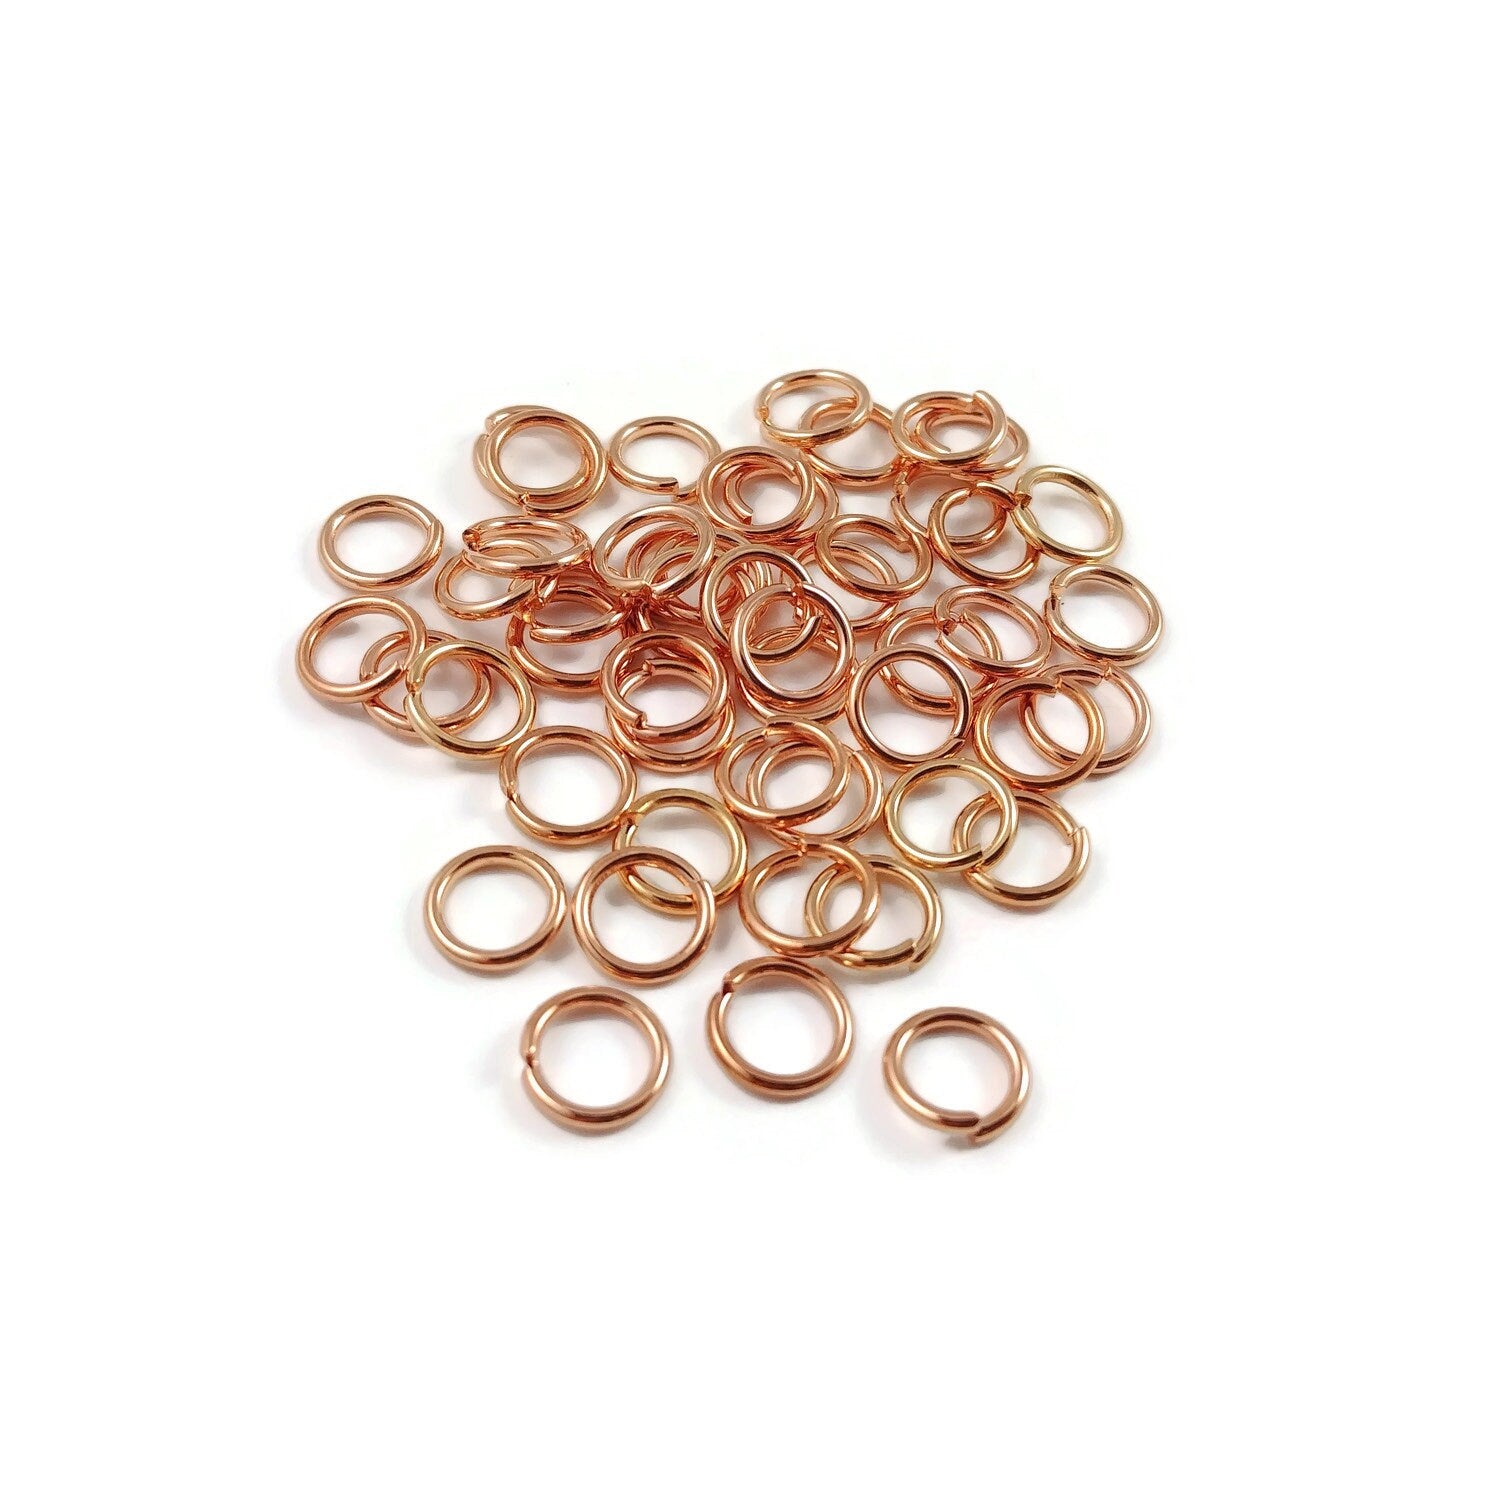 Copper Jump Ring Findings Open/ Close Tool For Jewellery - Temu